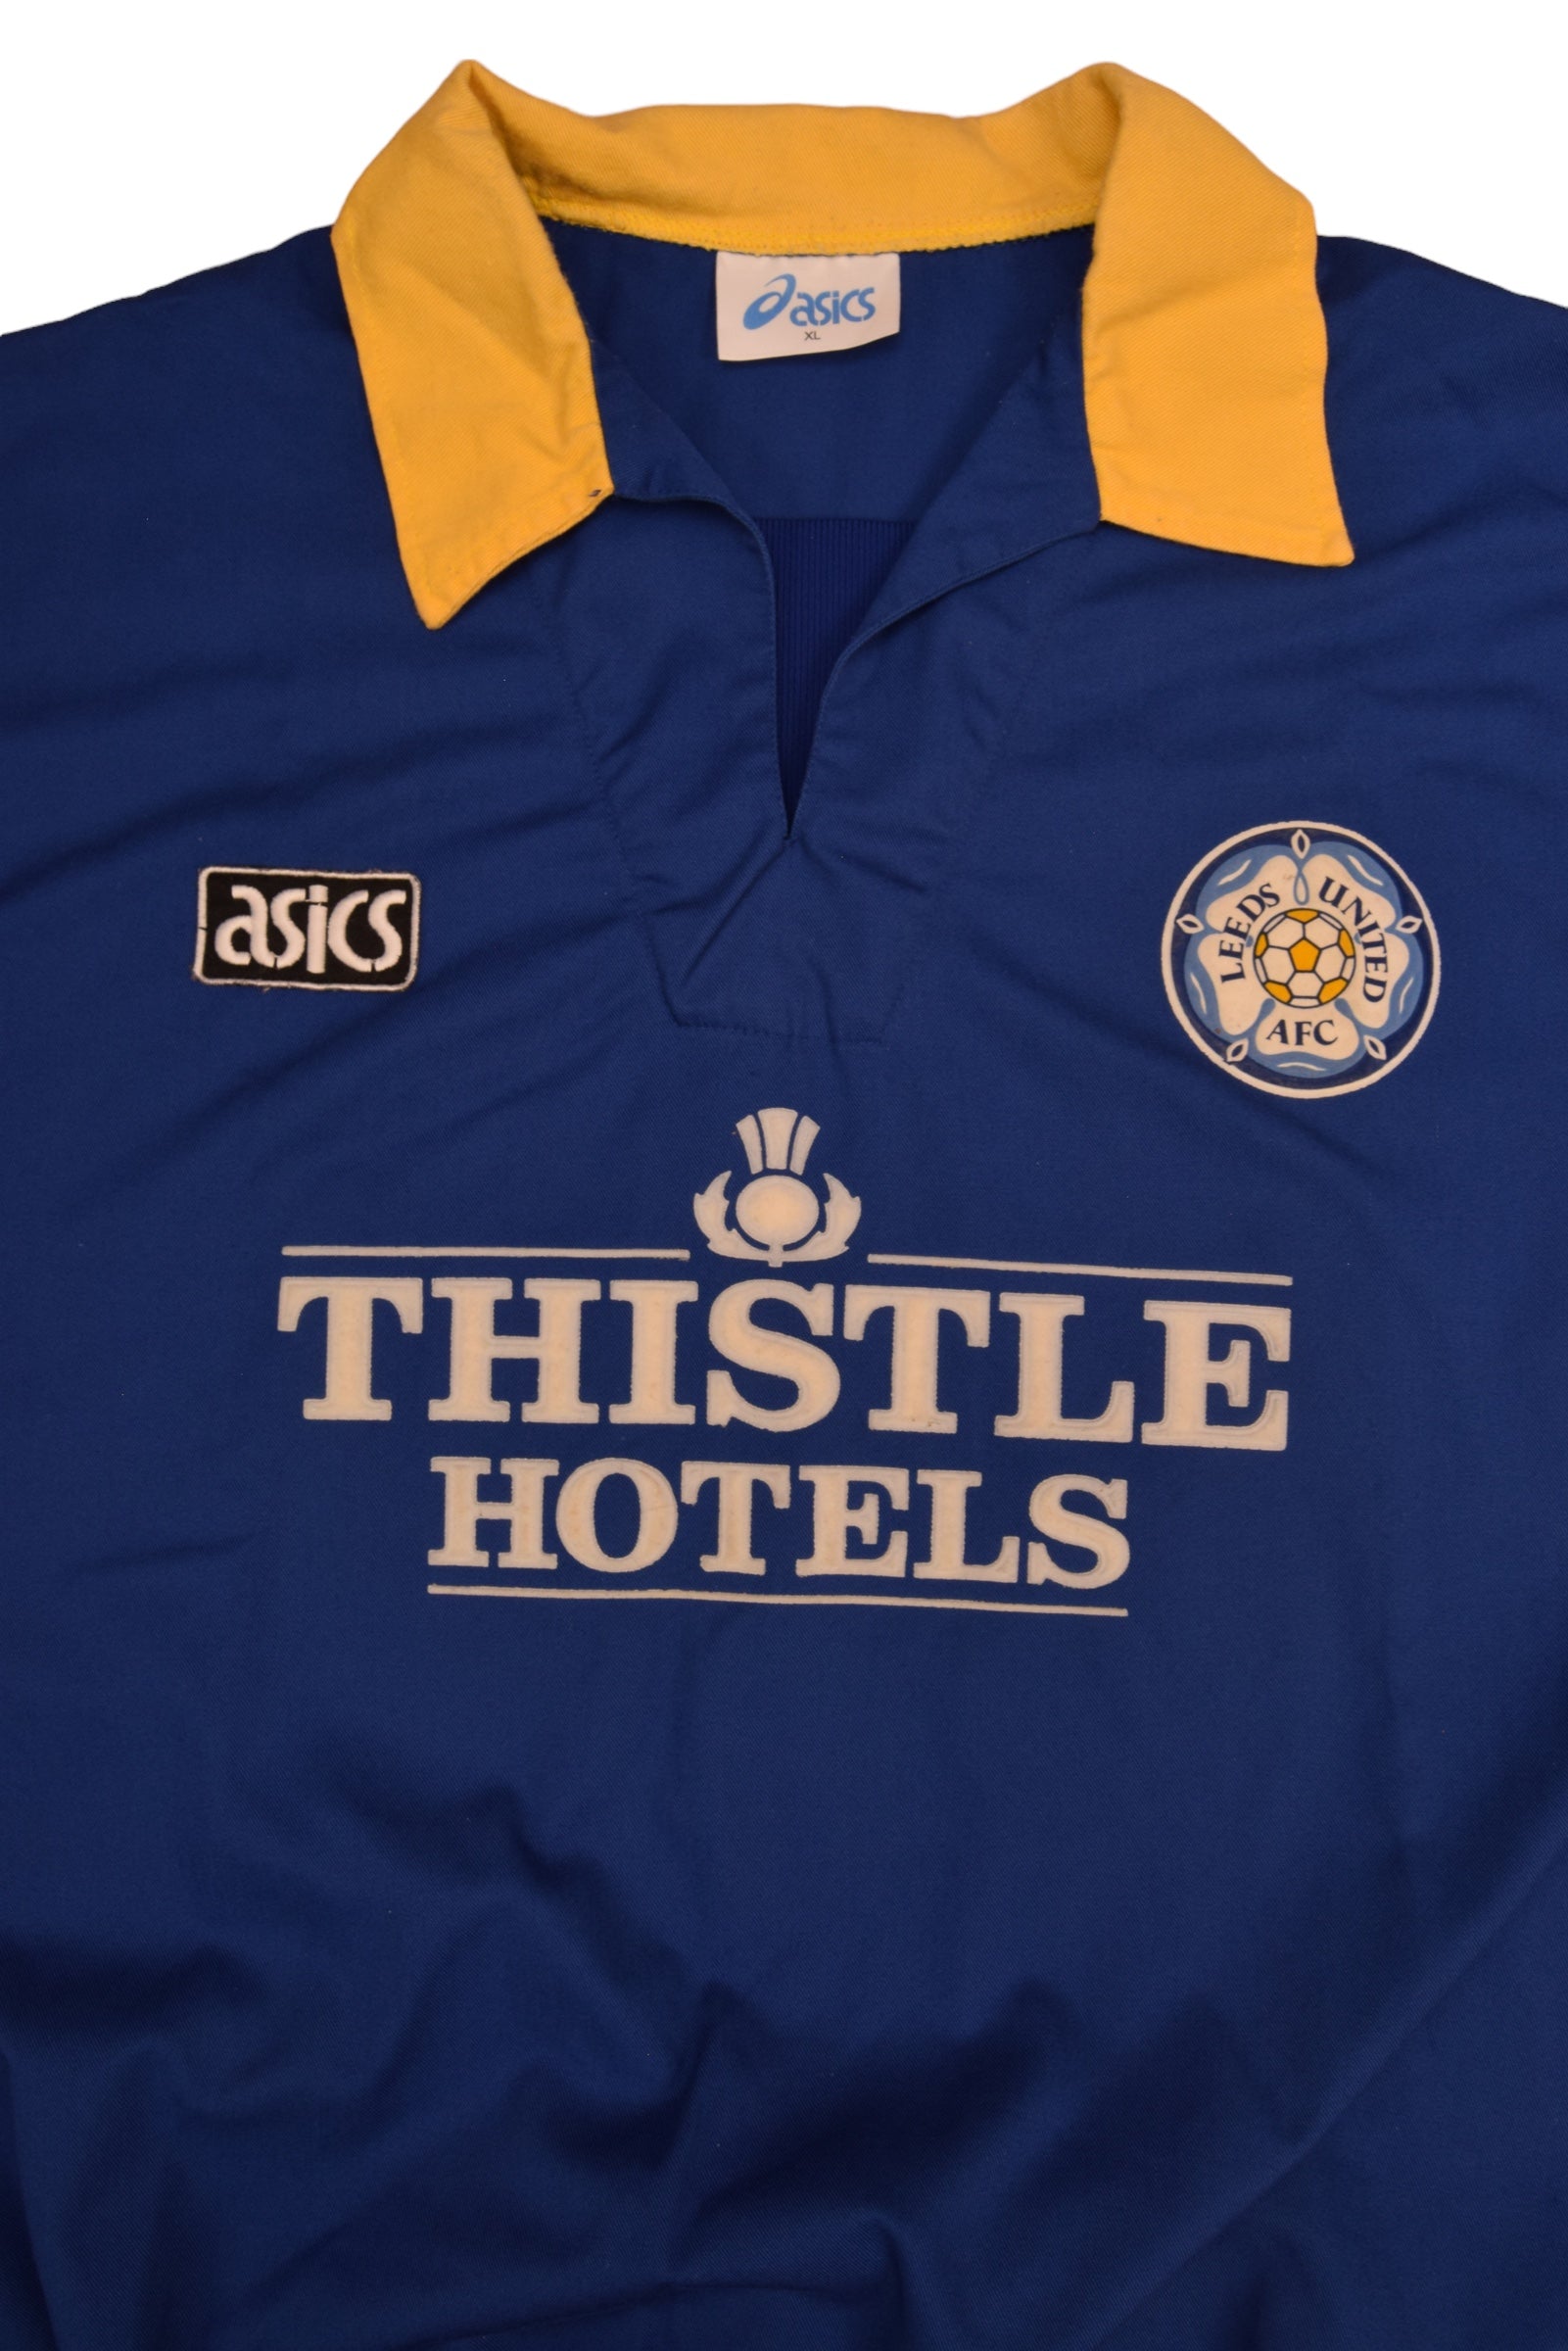 Vintage Leeds United Asics 1993 Drill Top Sweatshirt Jacket Size XL Made in UK Blue Yellow Thistle Hotels